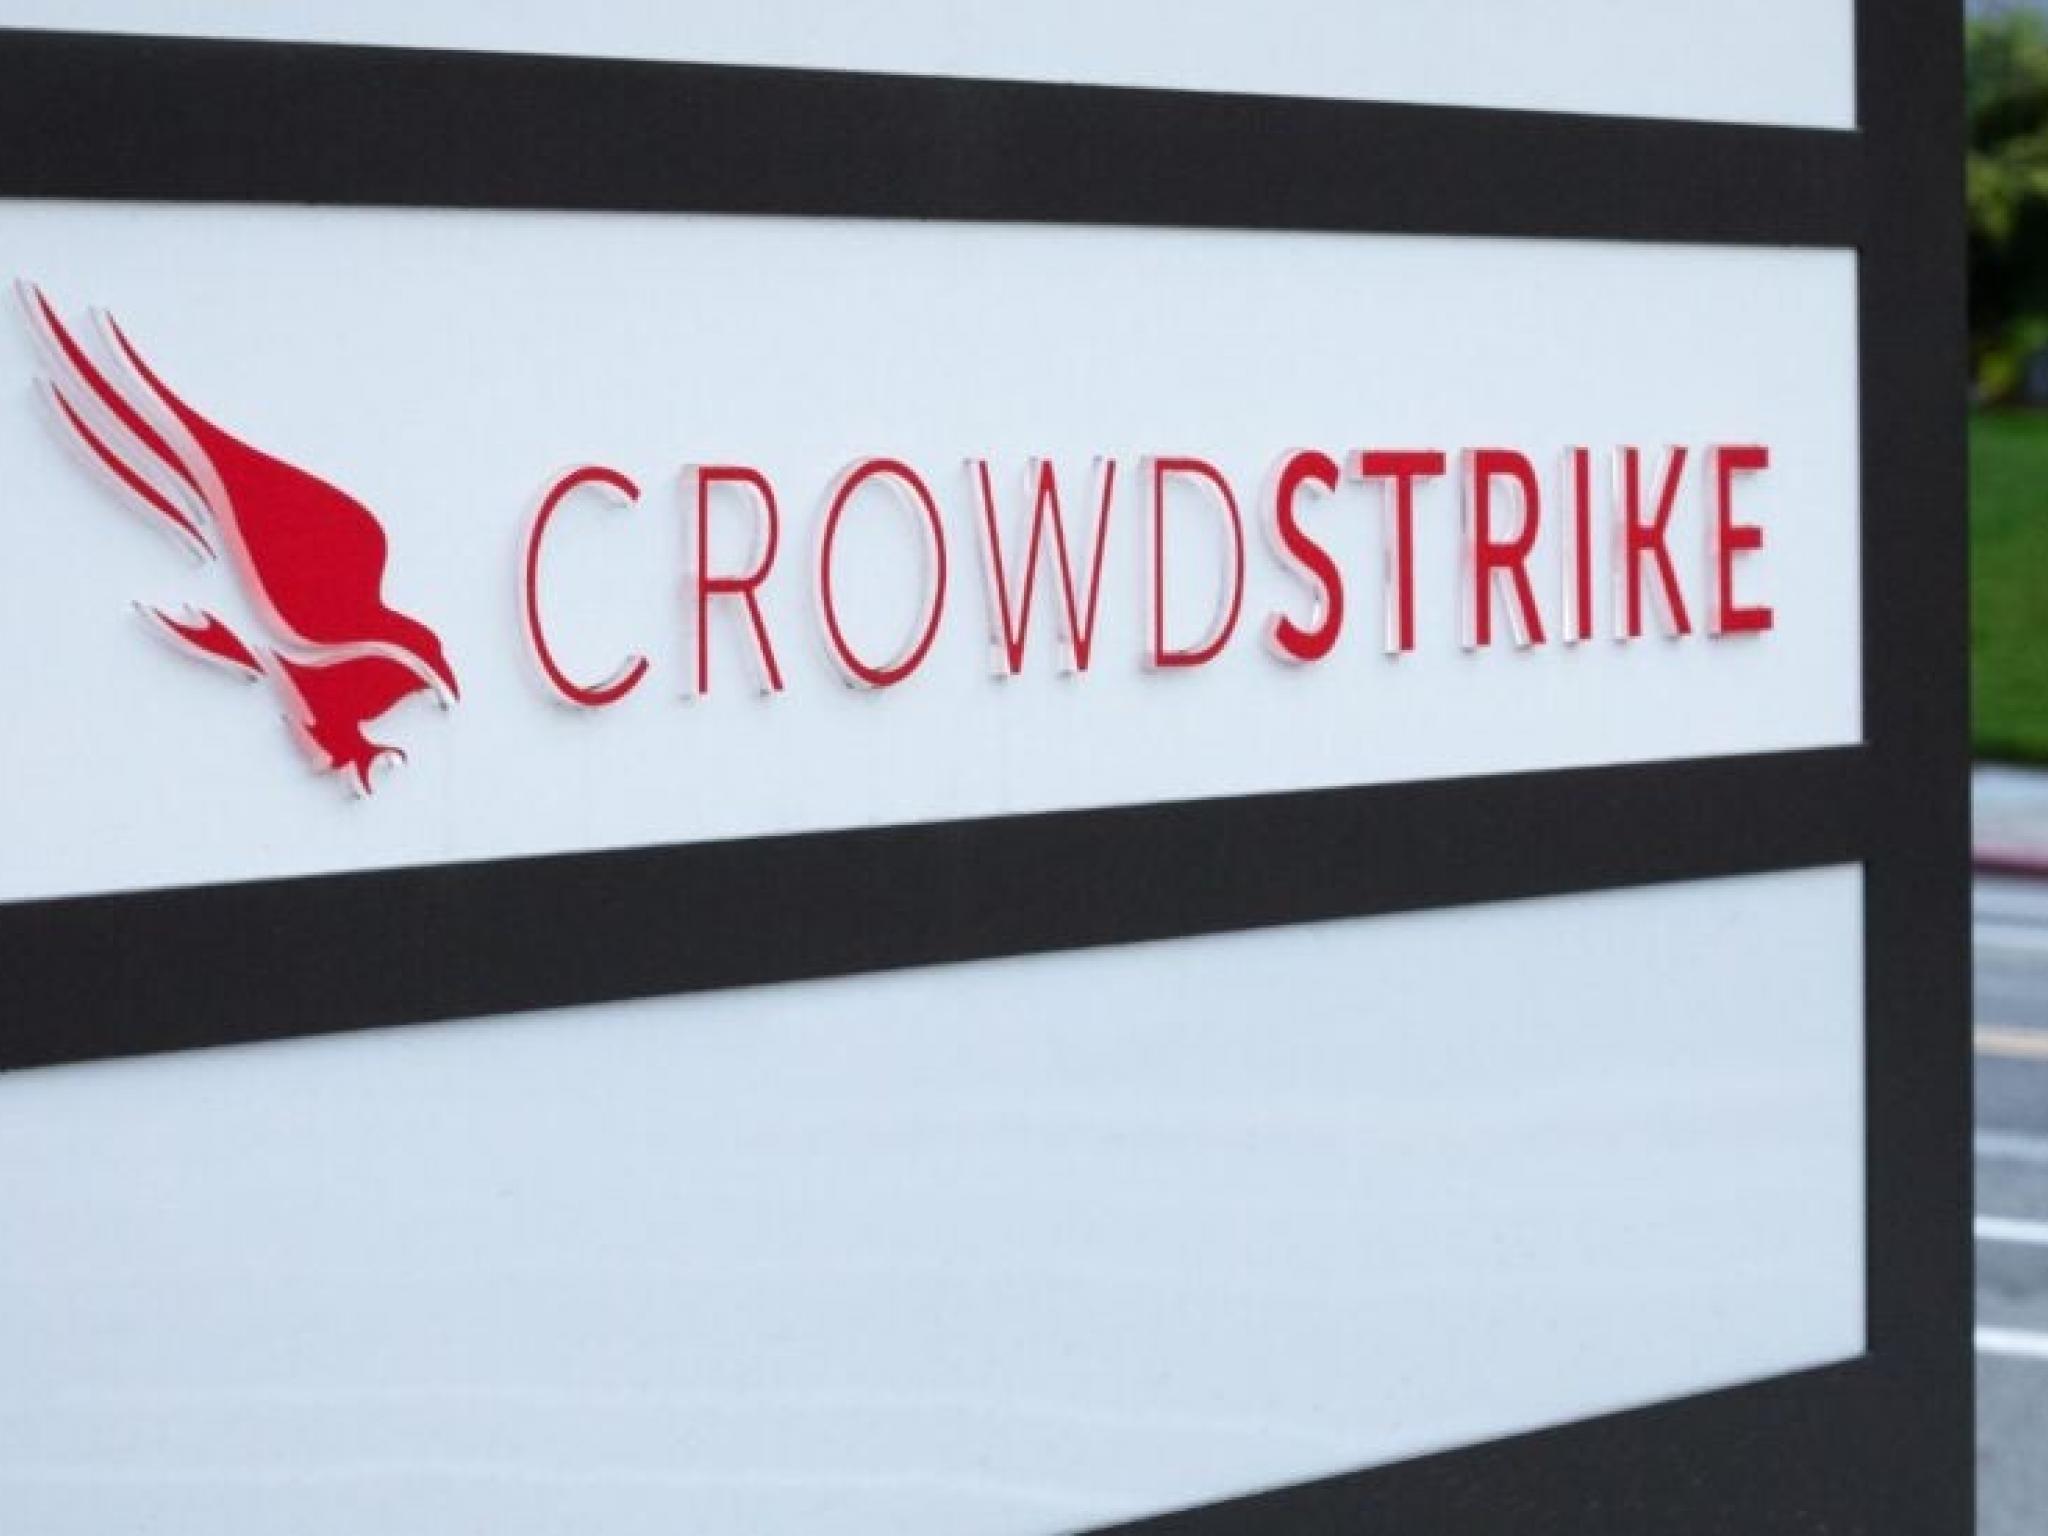  crowdstrike-update-for-microsoft-windows-continues-to-cause-chaos-thousands-of-us-flights-canceled-for-third-straight-day 